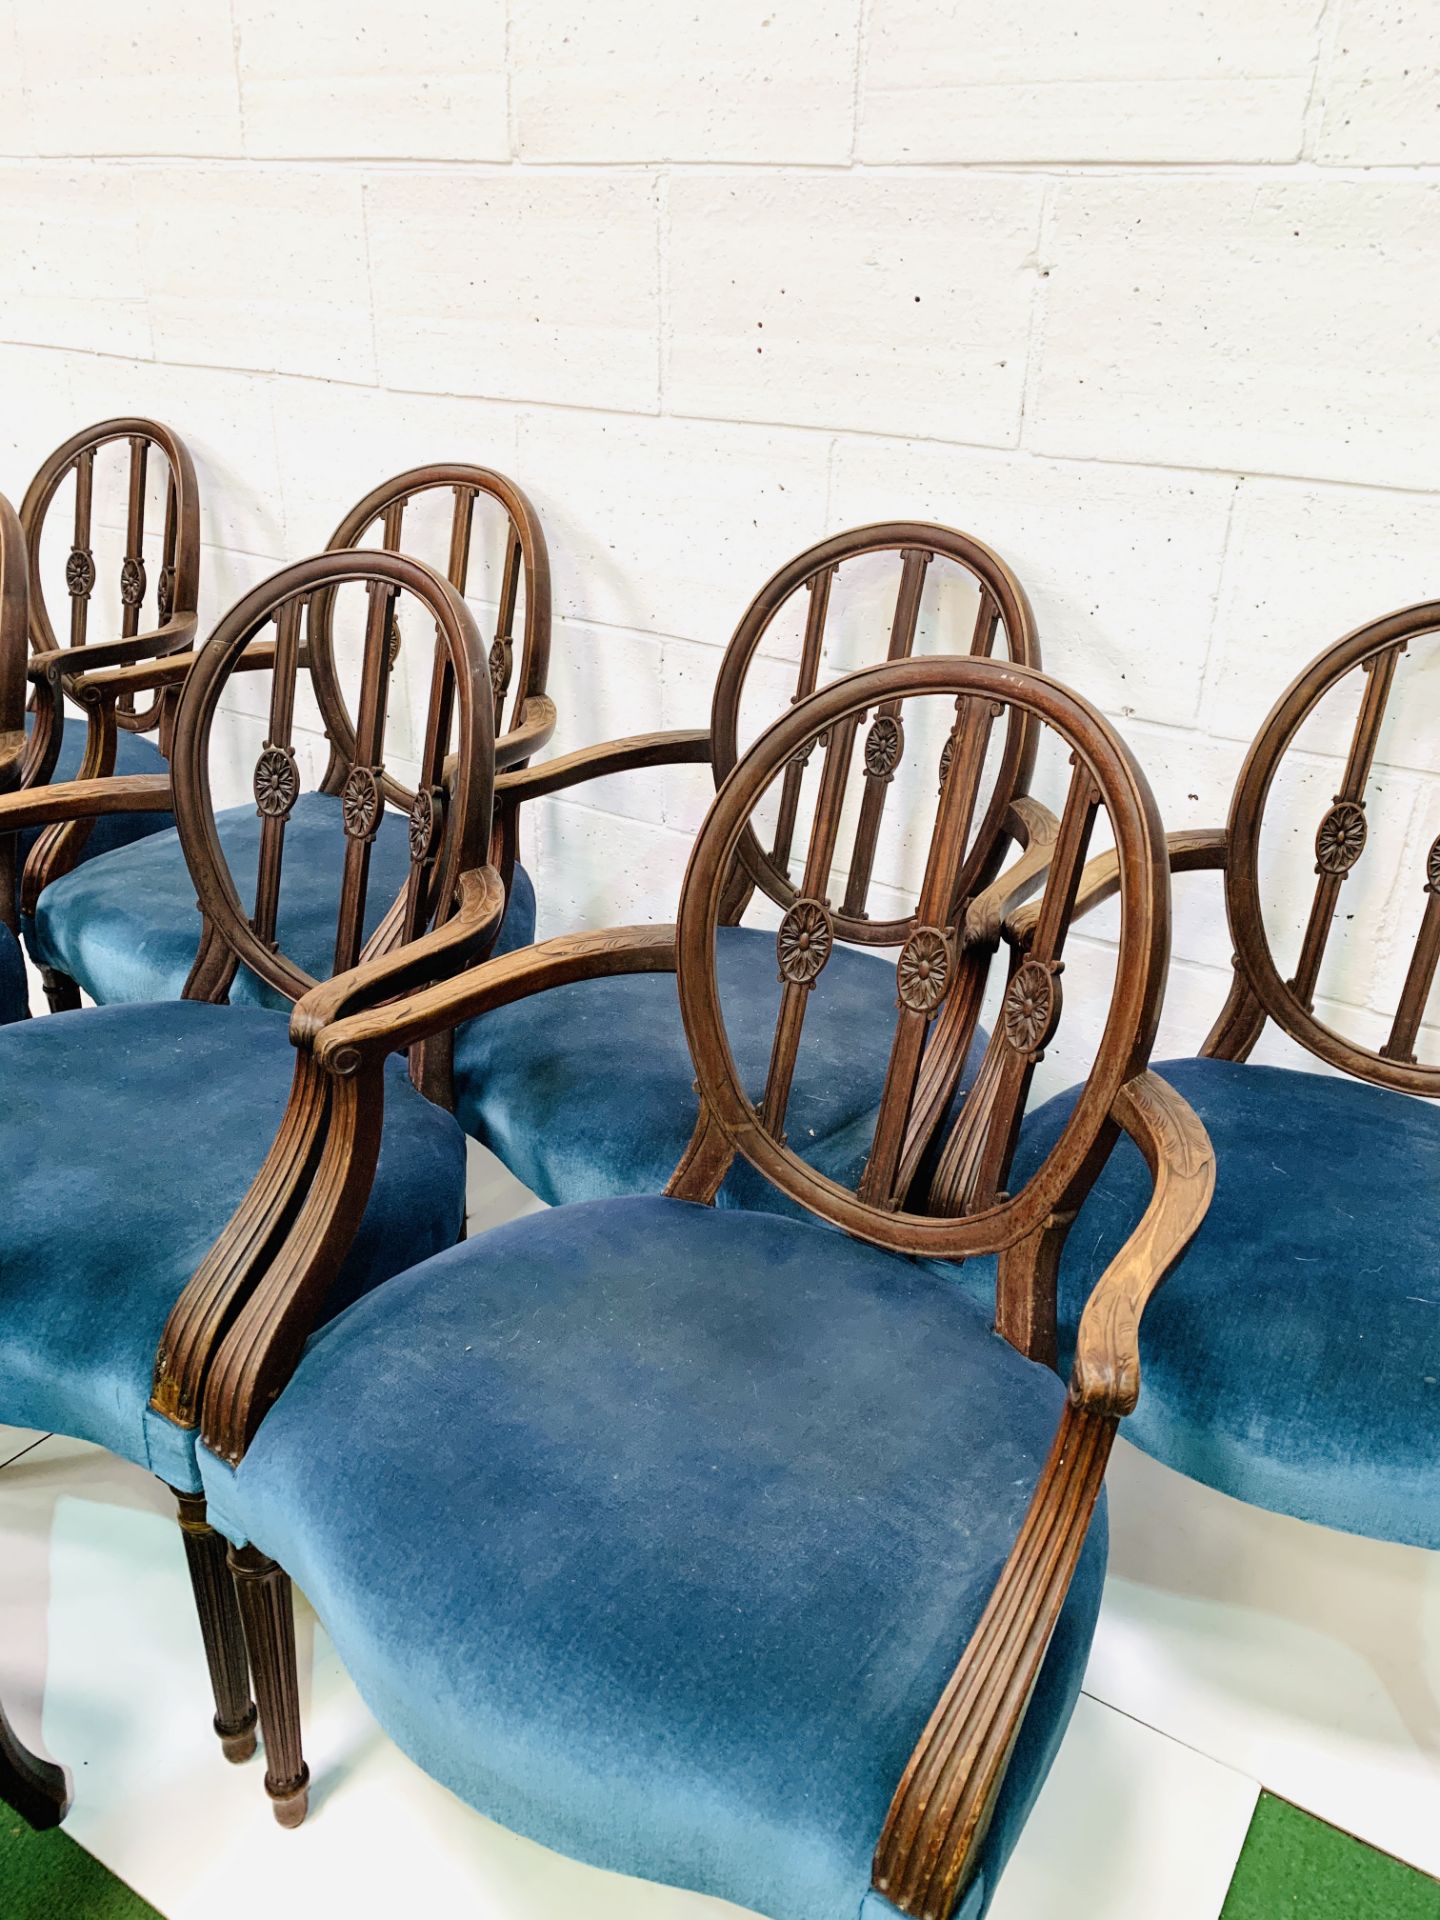 Set of eight mahogany Regency style open elbow chairs upholstered in petrol blue velvet. - Image 2 of 7